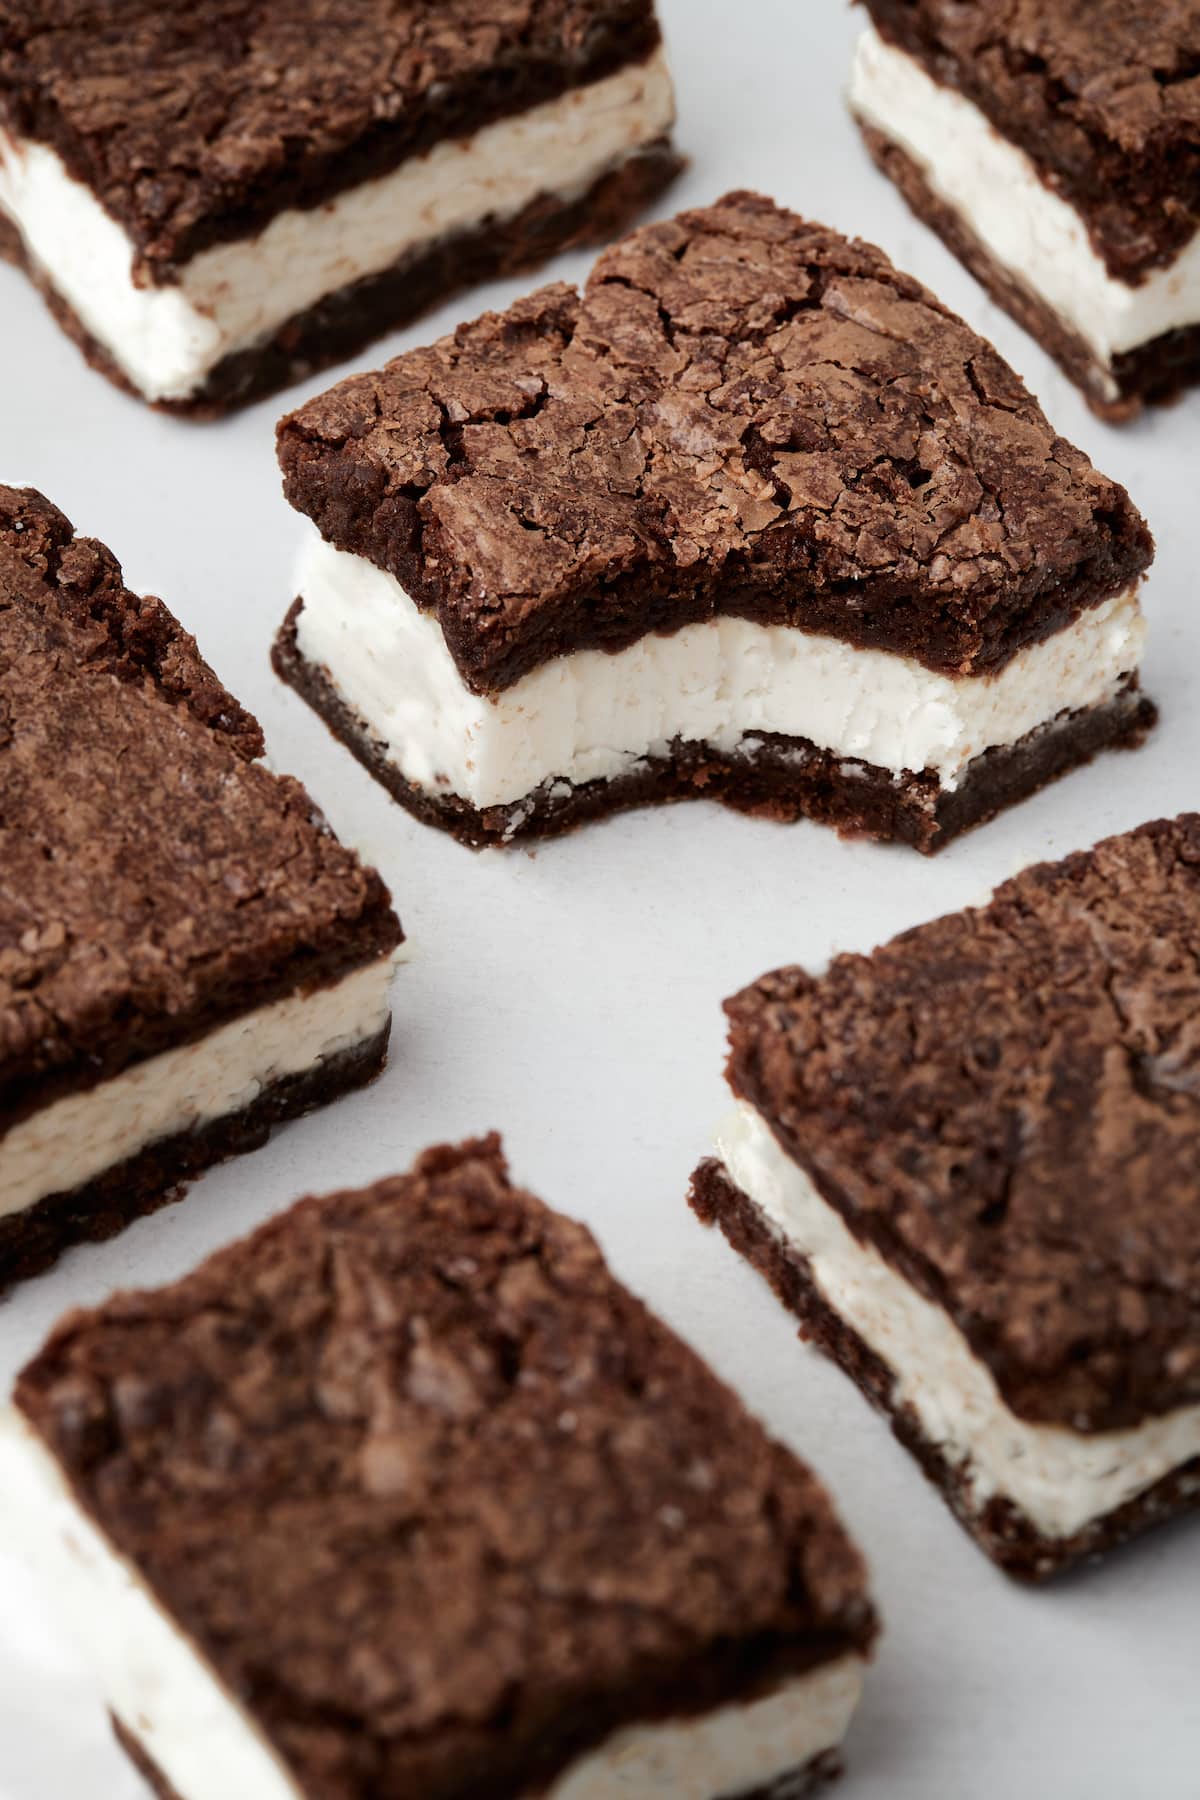 Rows of Oreo brownies cut into squares, one with a bite missing.